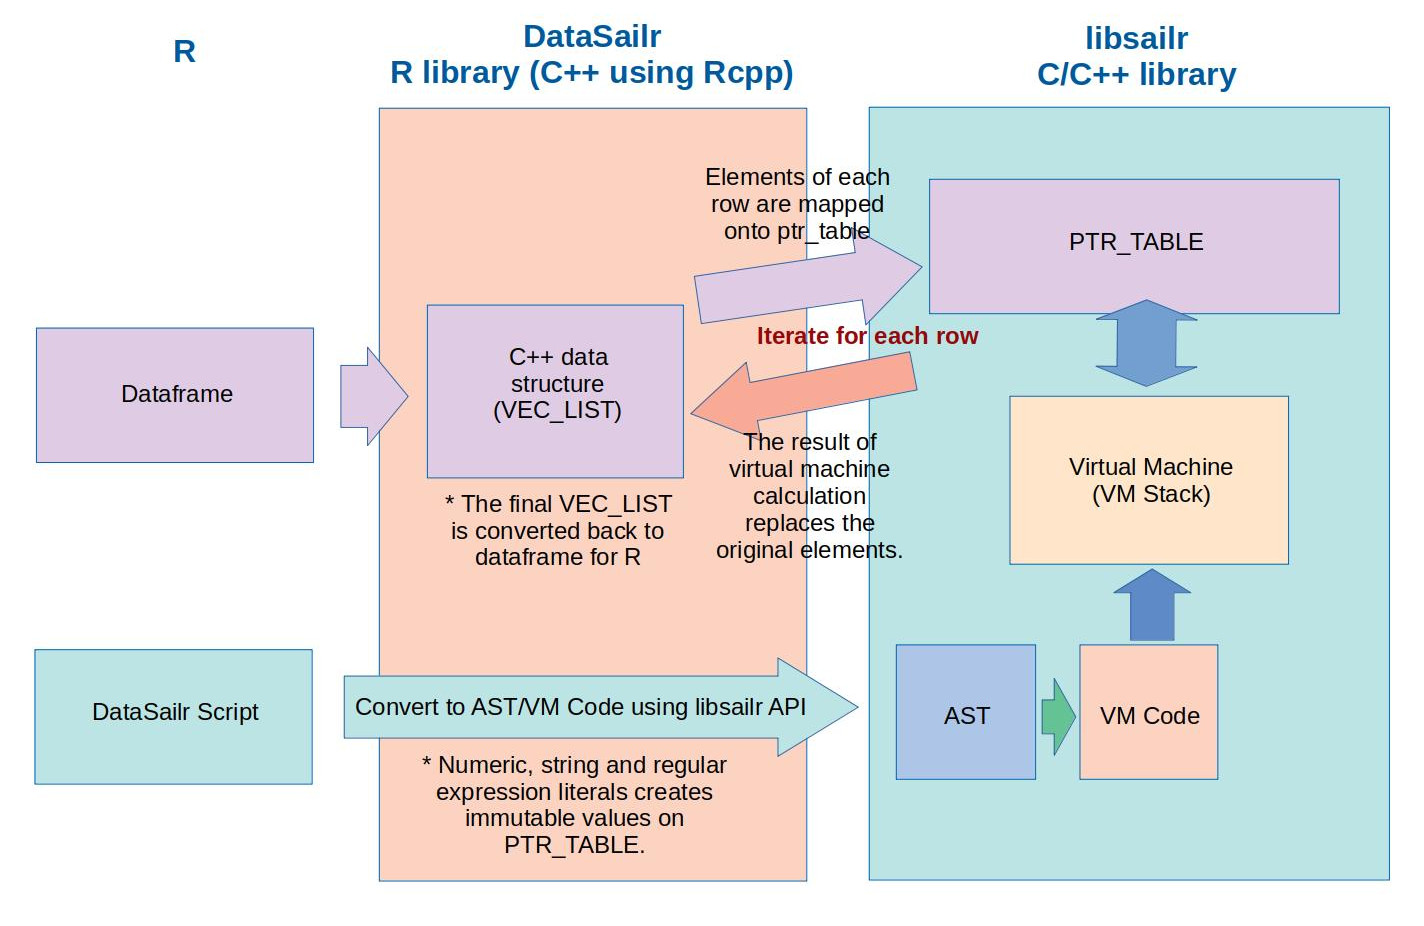 How DataSailr works with libsailr